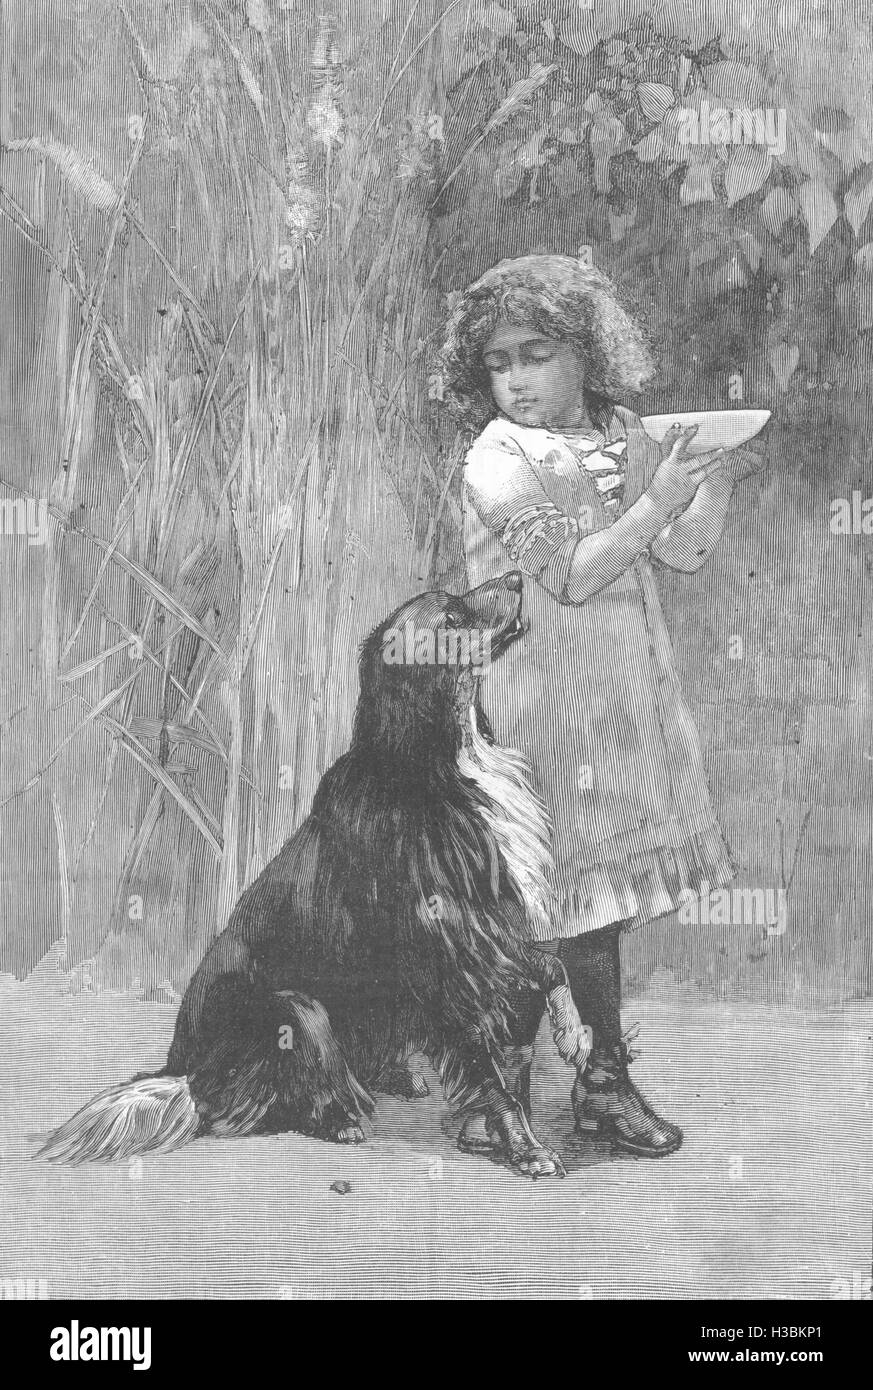 DOGS 'Give me some'. Child with bowl of food teasing dog 1887. The Illustrated London News Stock Photo